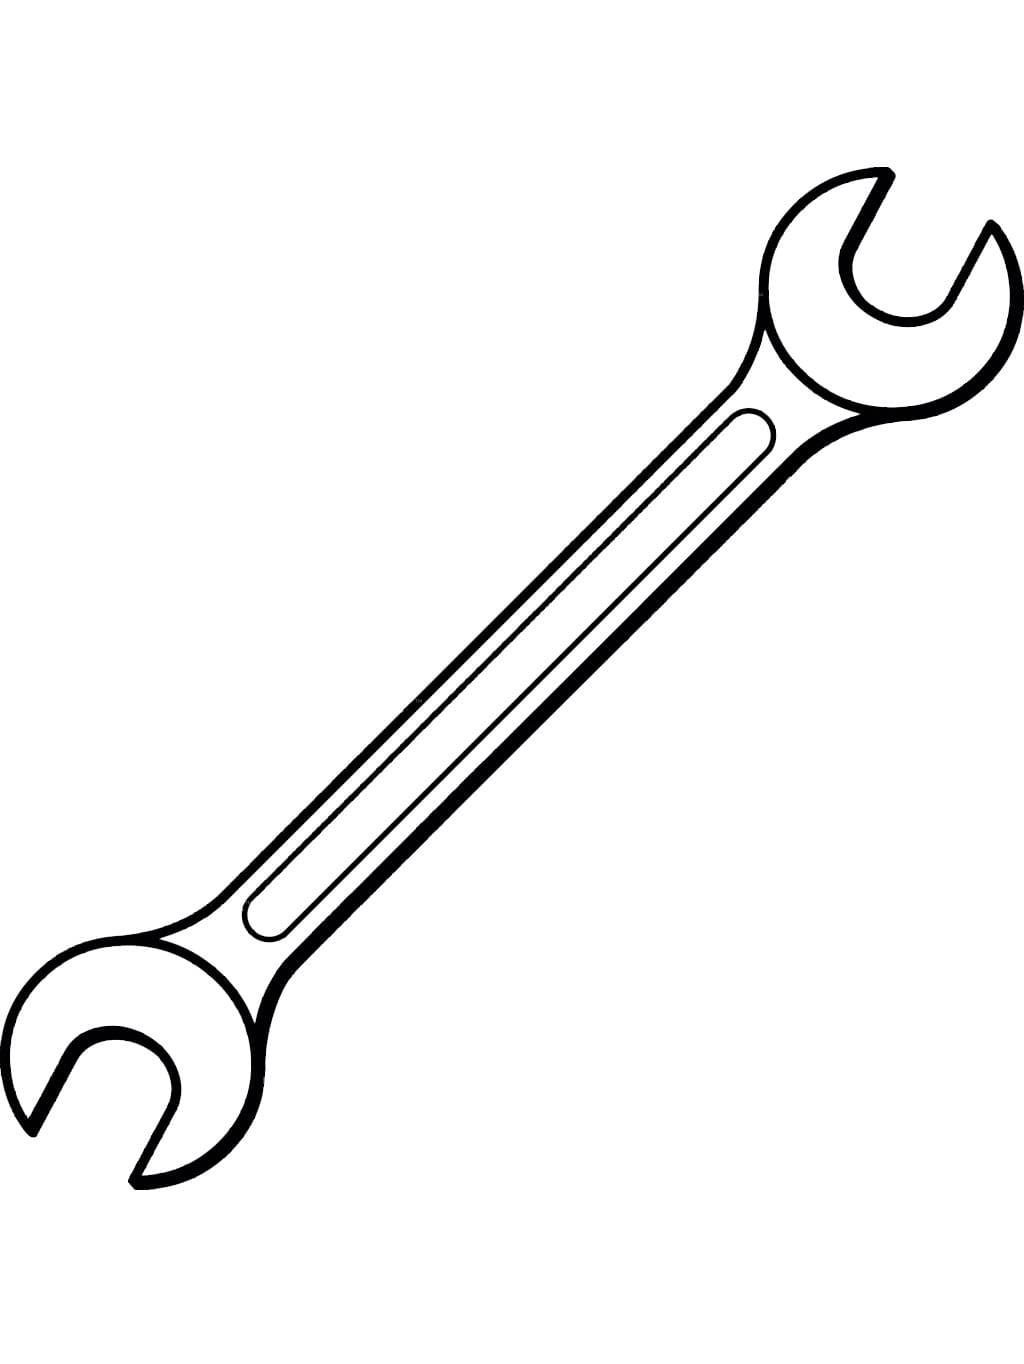 A Wrench